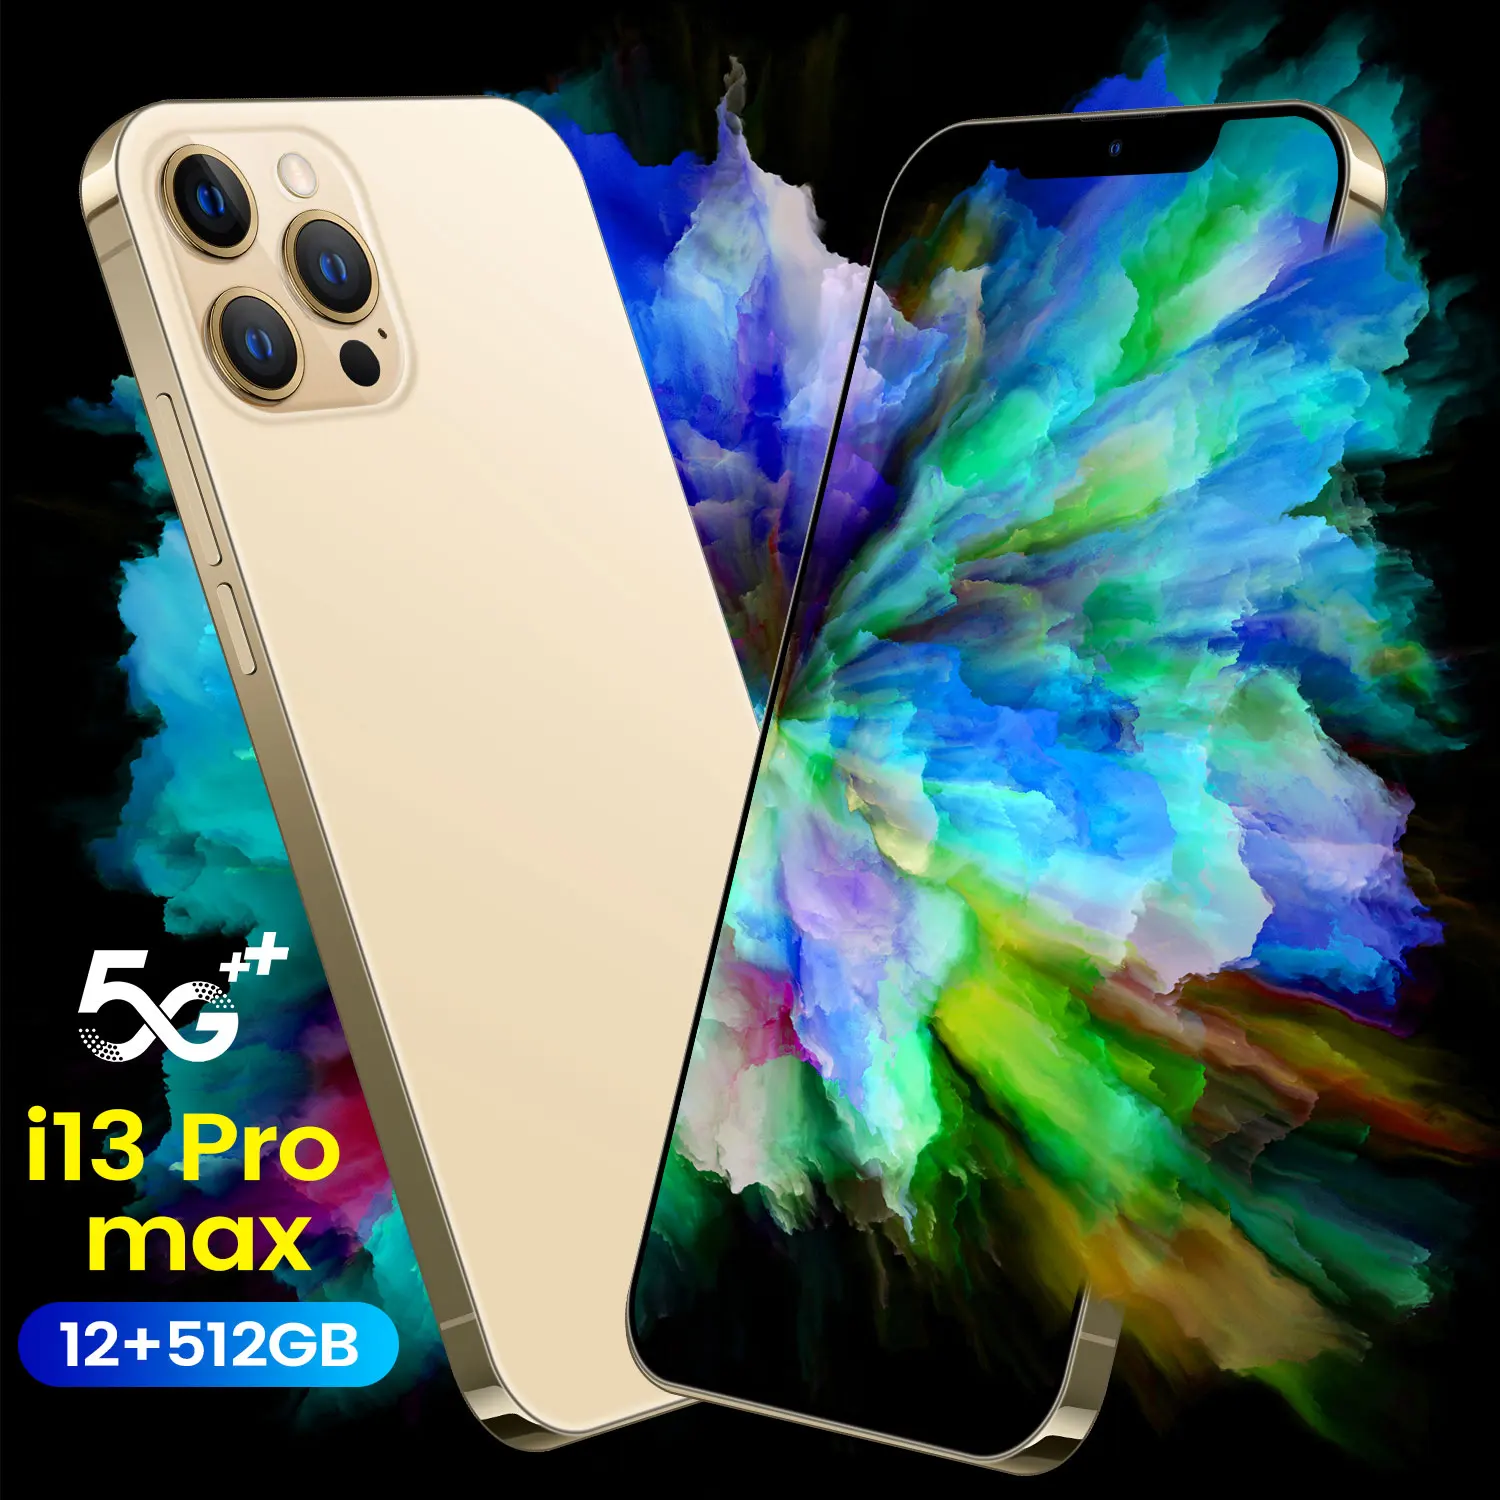 

USA UK unlock i12 Pro Max New Smartphone 6.7 Inch Android Telephone Hd All-in-one Smartphone High Quality New Smartphones